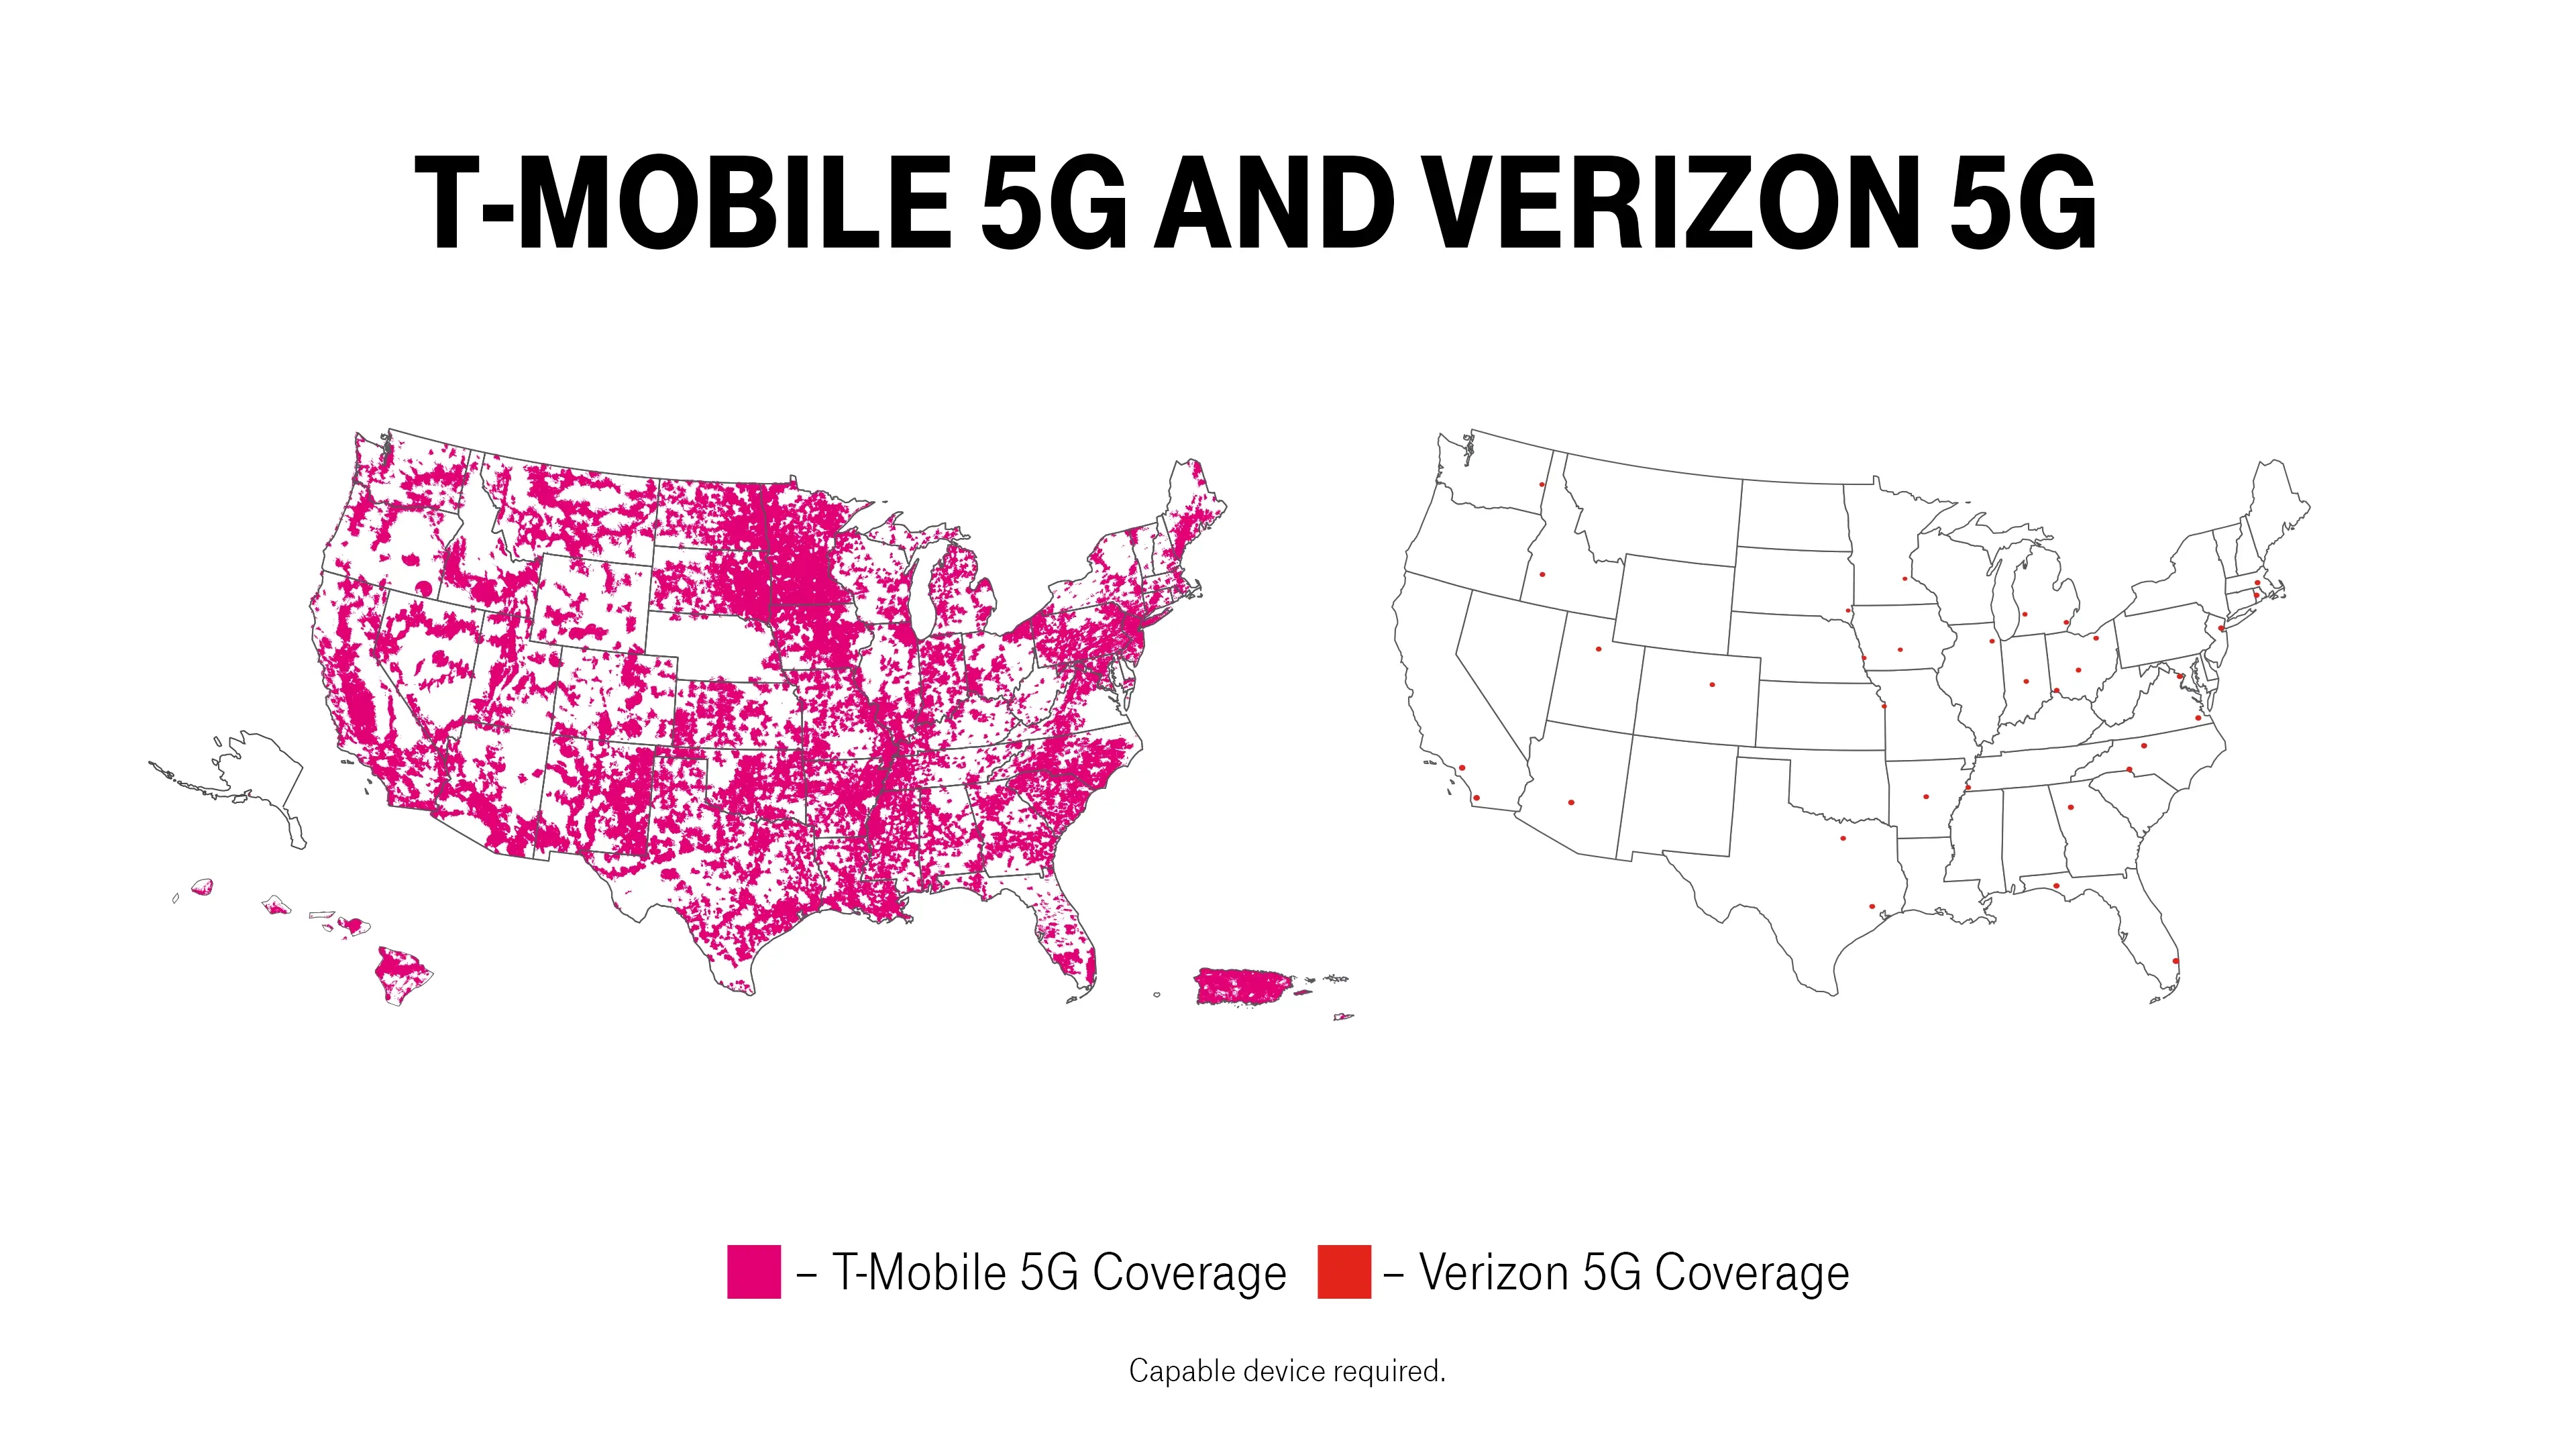 TMobile is killing Verizon and AT&T in the 5G race Phandroid